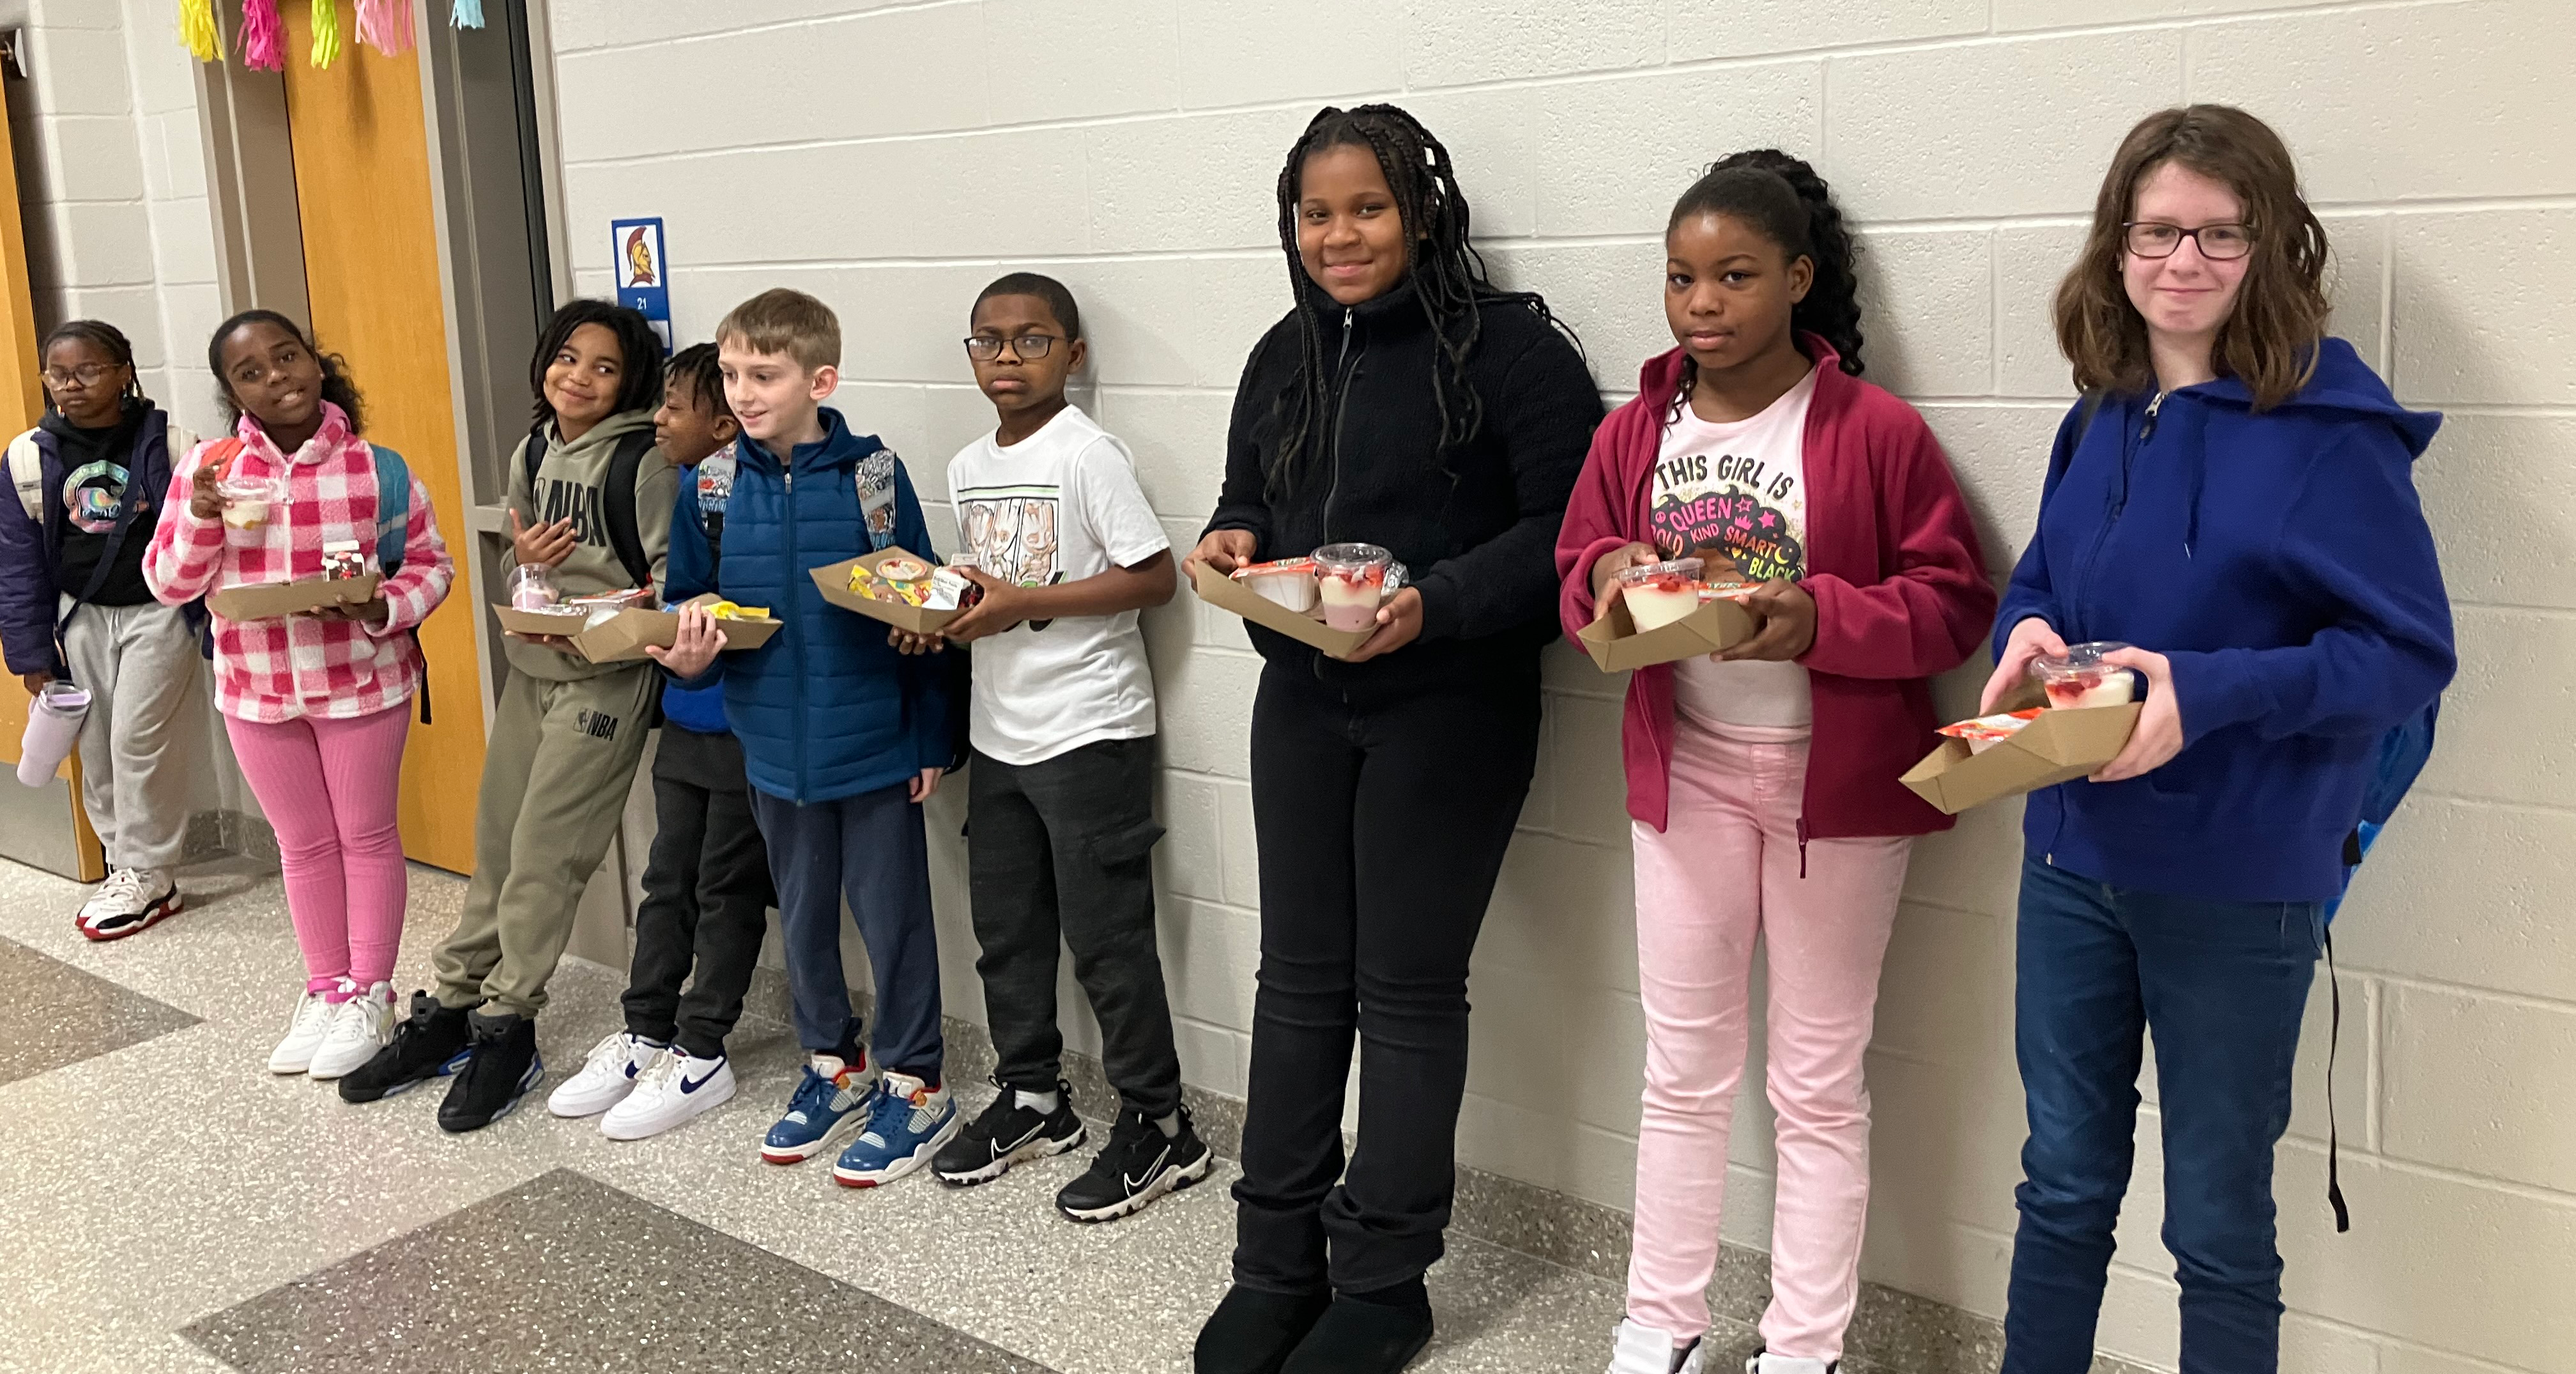 A group of students holding their lunches while standing in the hallway